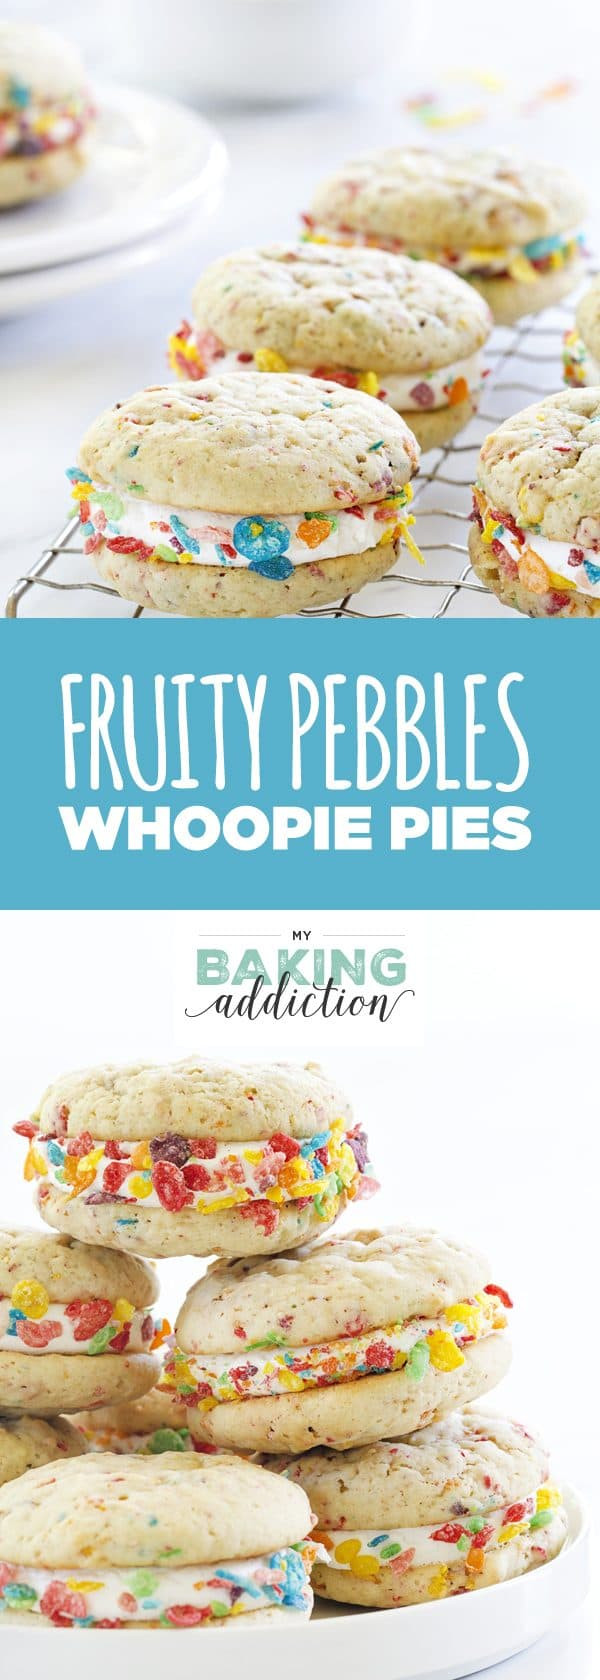 Fruity Pebbles Desserts
 Fruity Pebbles Whoopie Pies My Baking Addiction